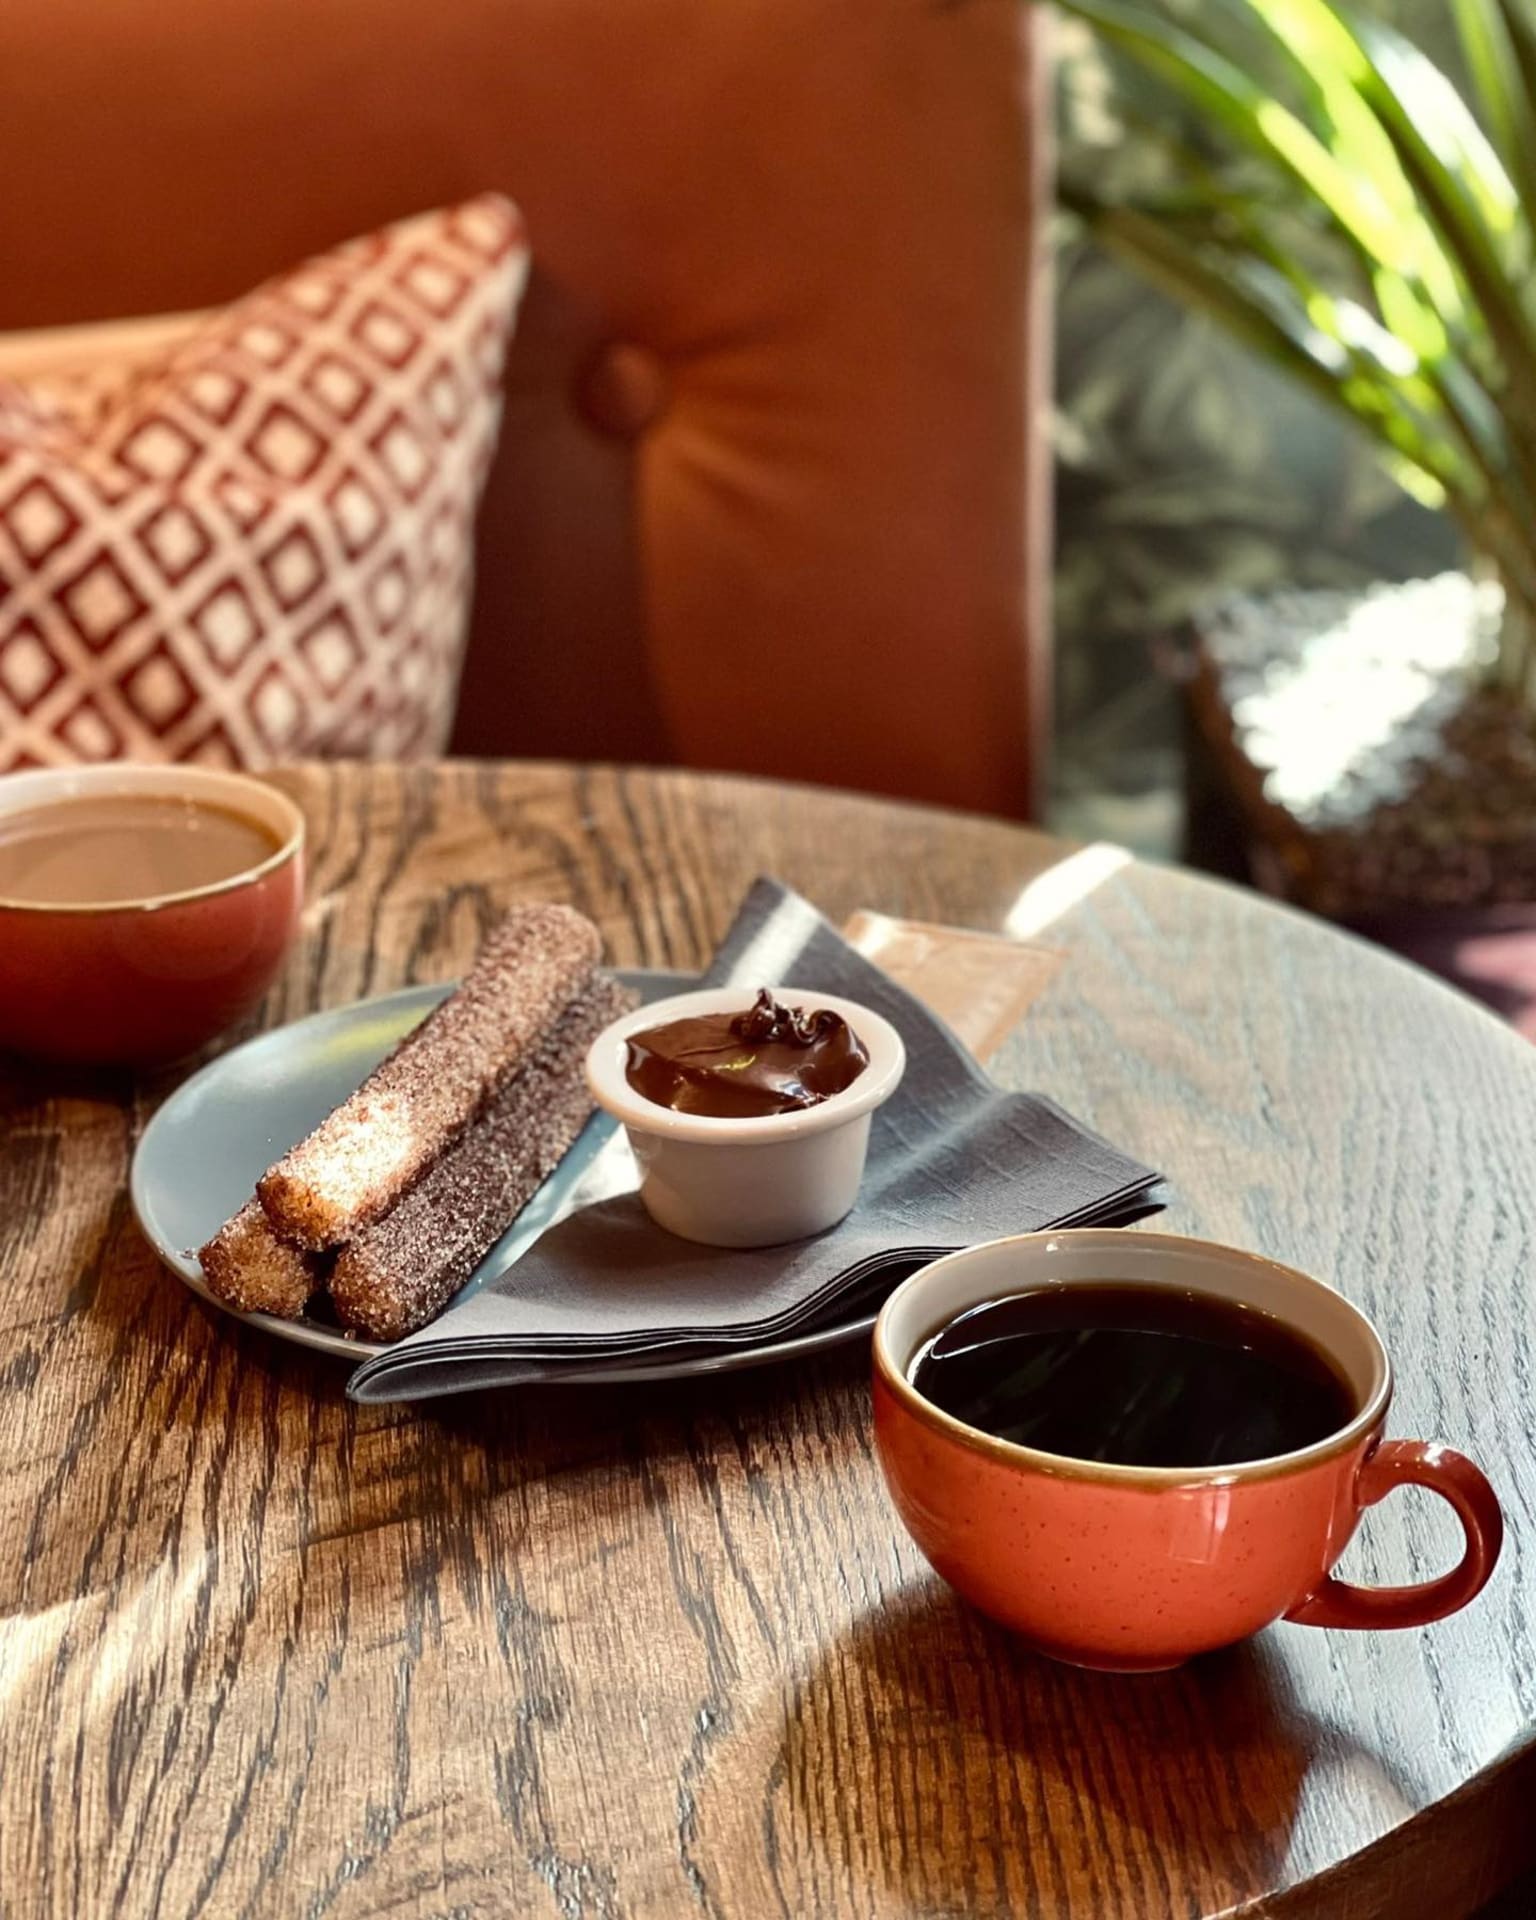 Freshly ground coffee and churros